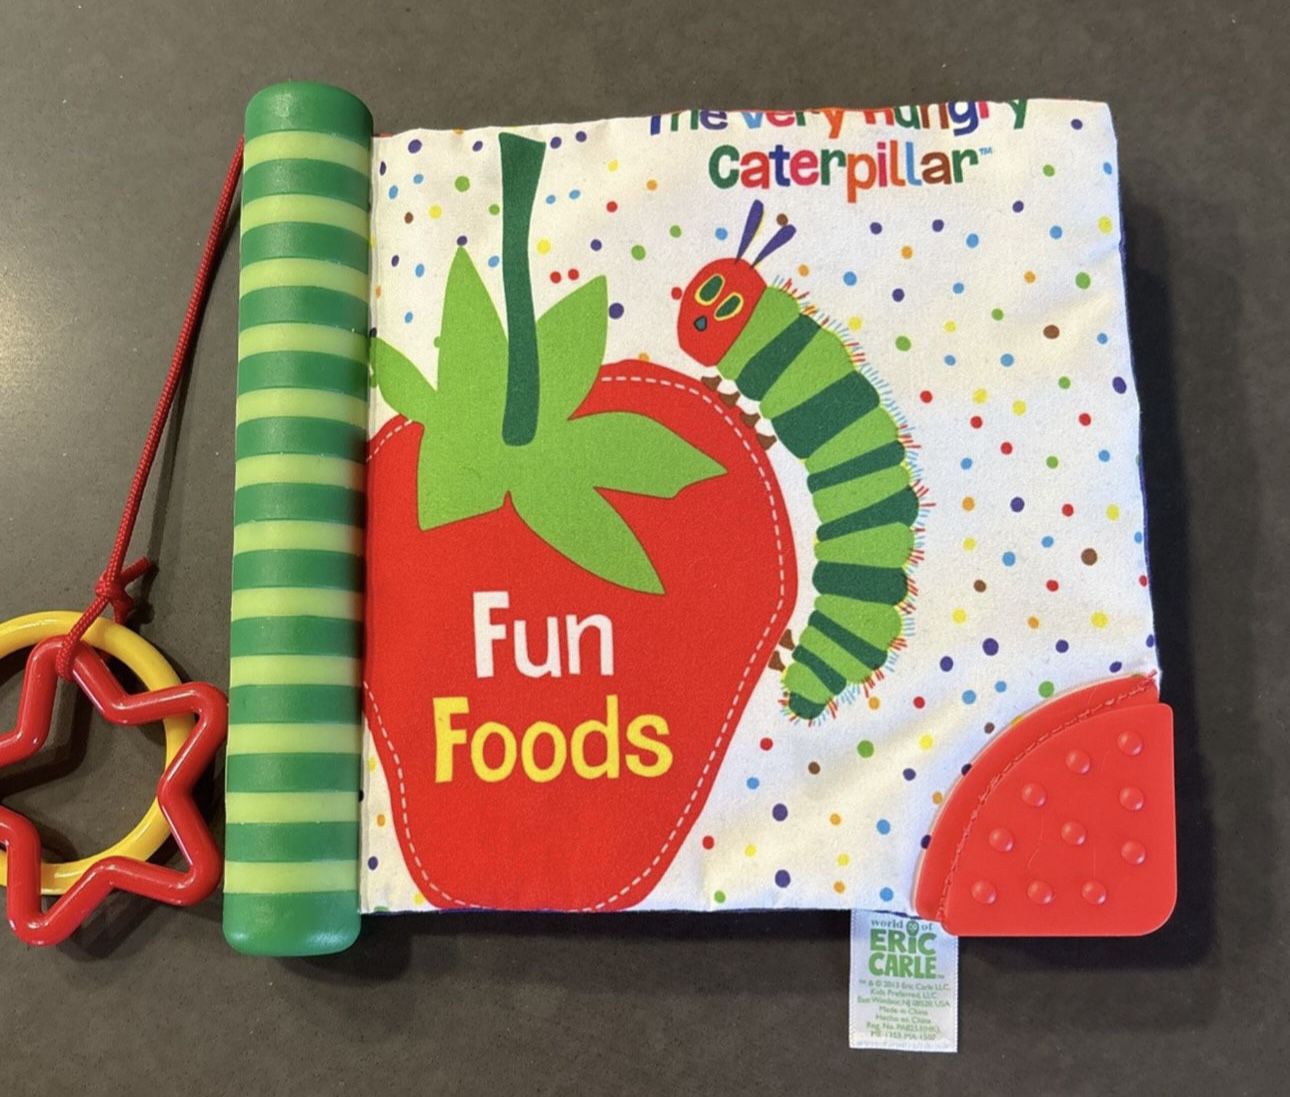 The Very Hungry Caterpillar Soft Crinkle/Teething Book